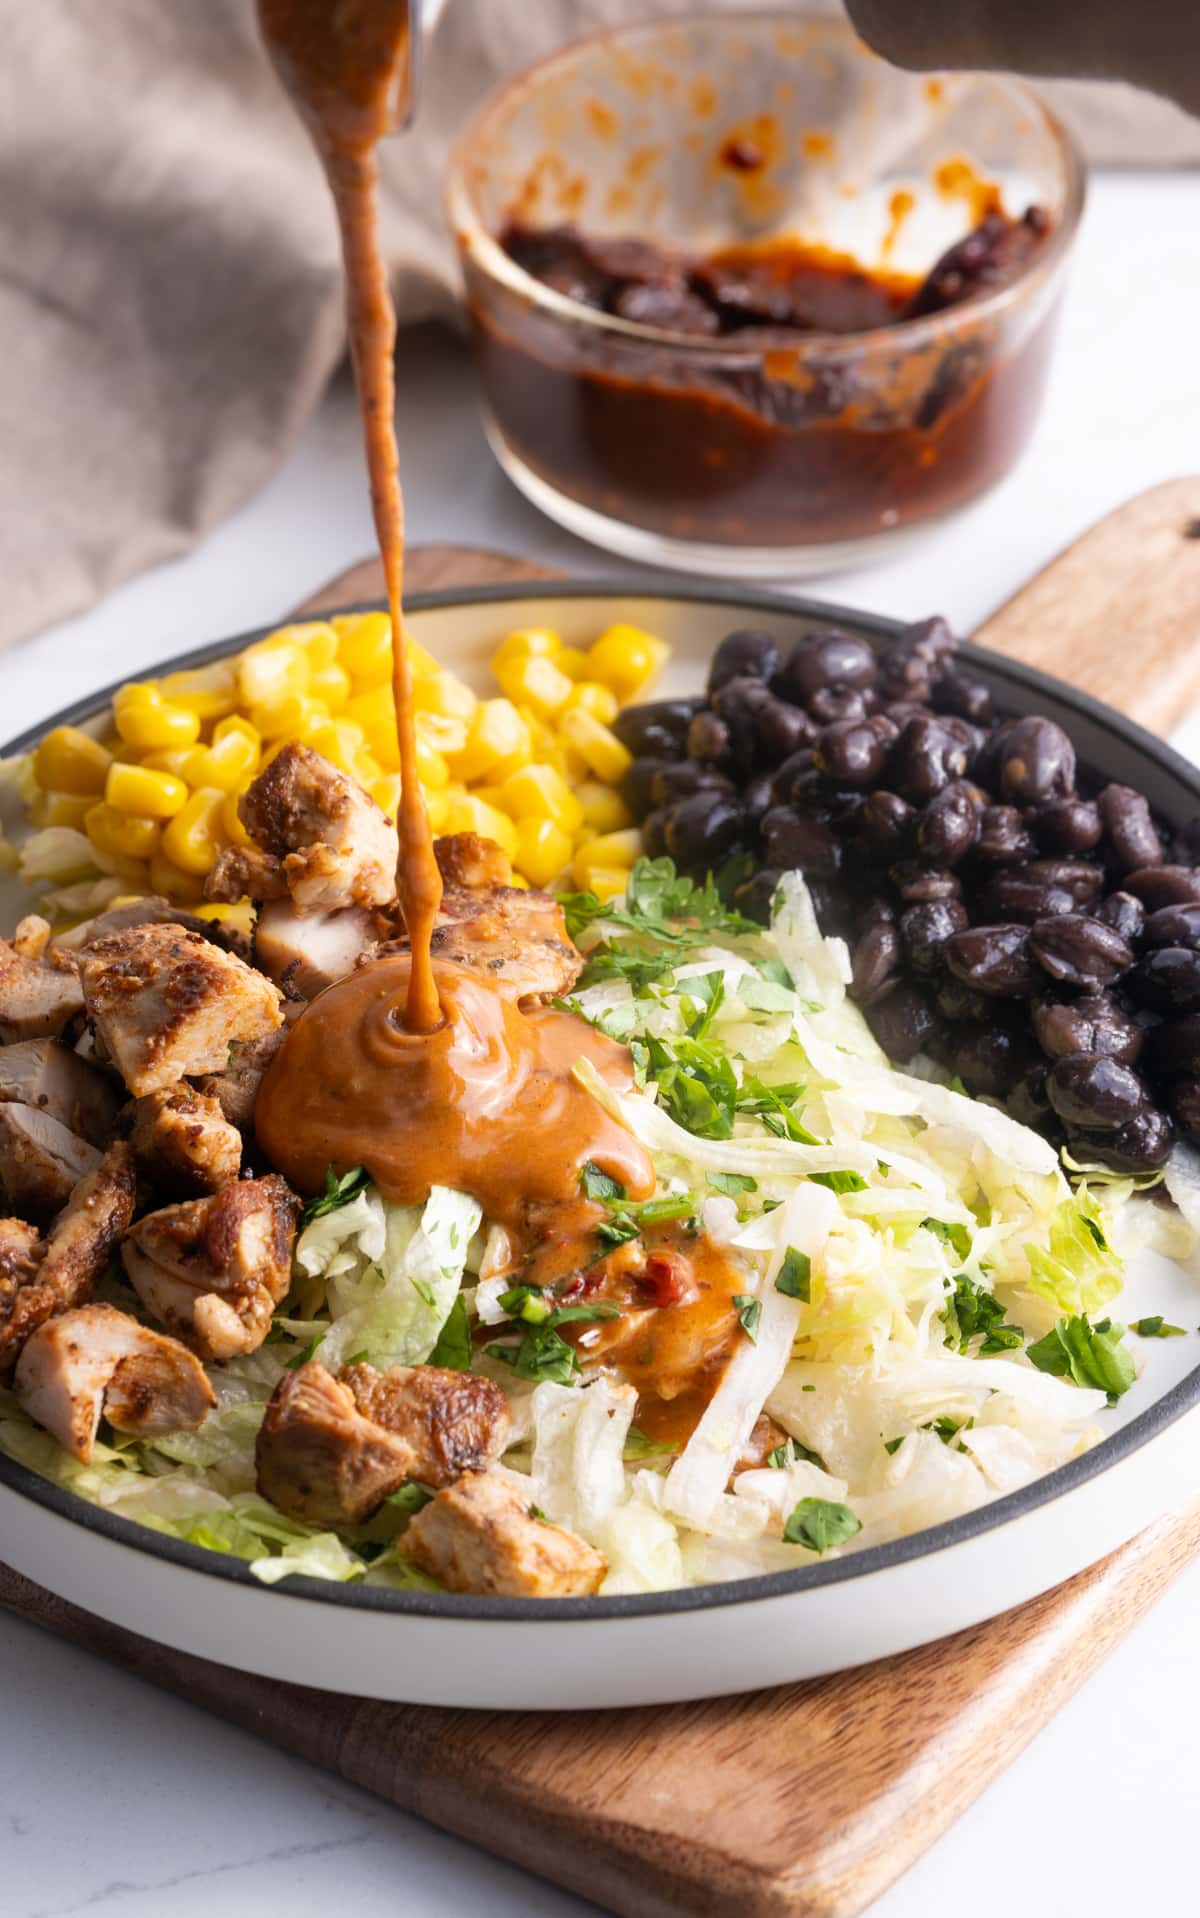 vinaigrette being poured over salad with chicken, lettuce, corn, and black beans